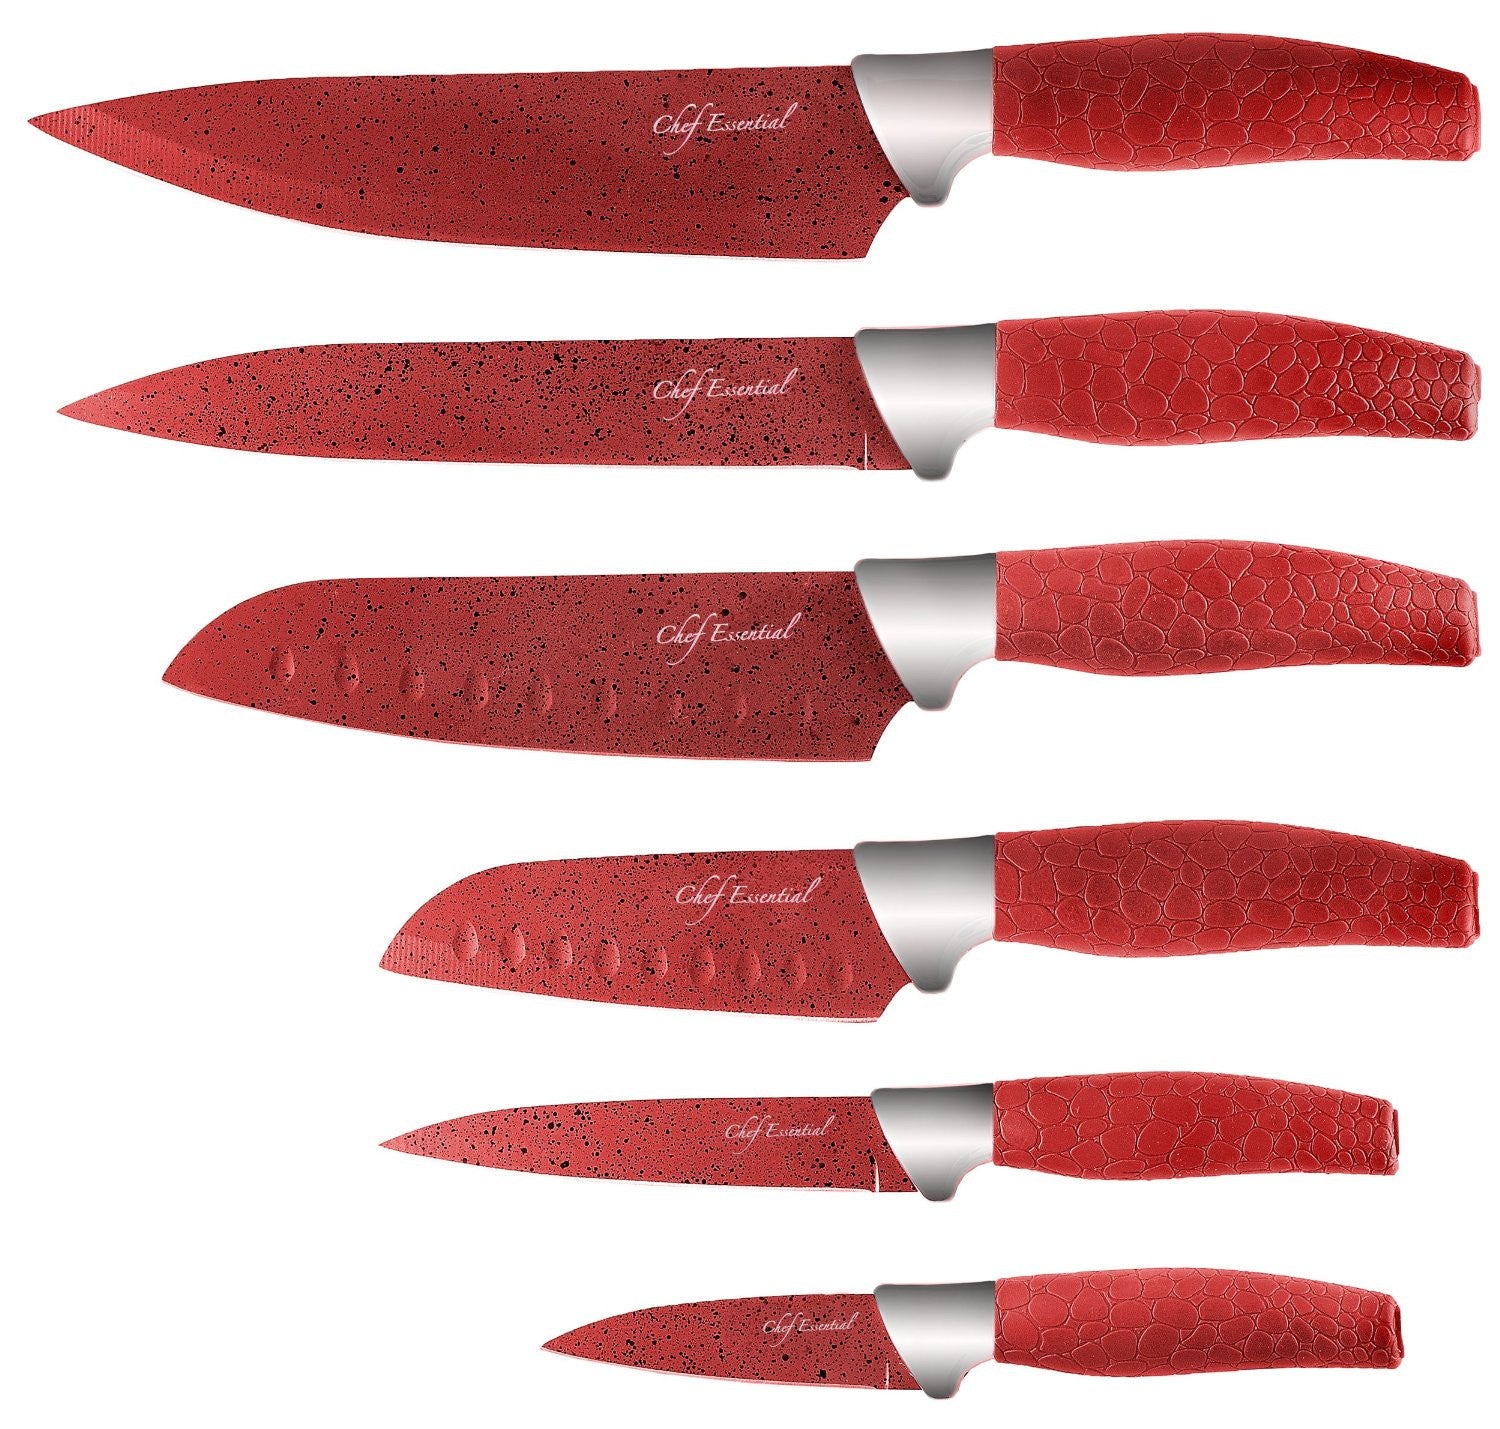 6 pieces Kitchen Knife Set Everich Chef Knives Stainless Steel Nonstic –